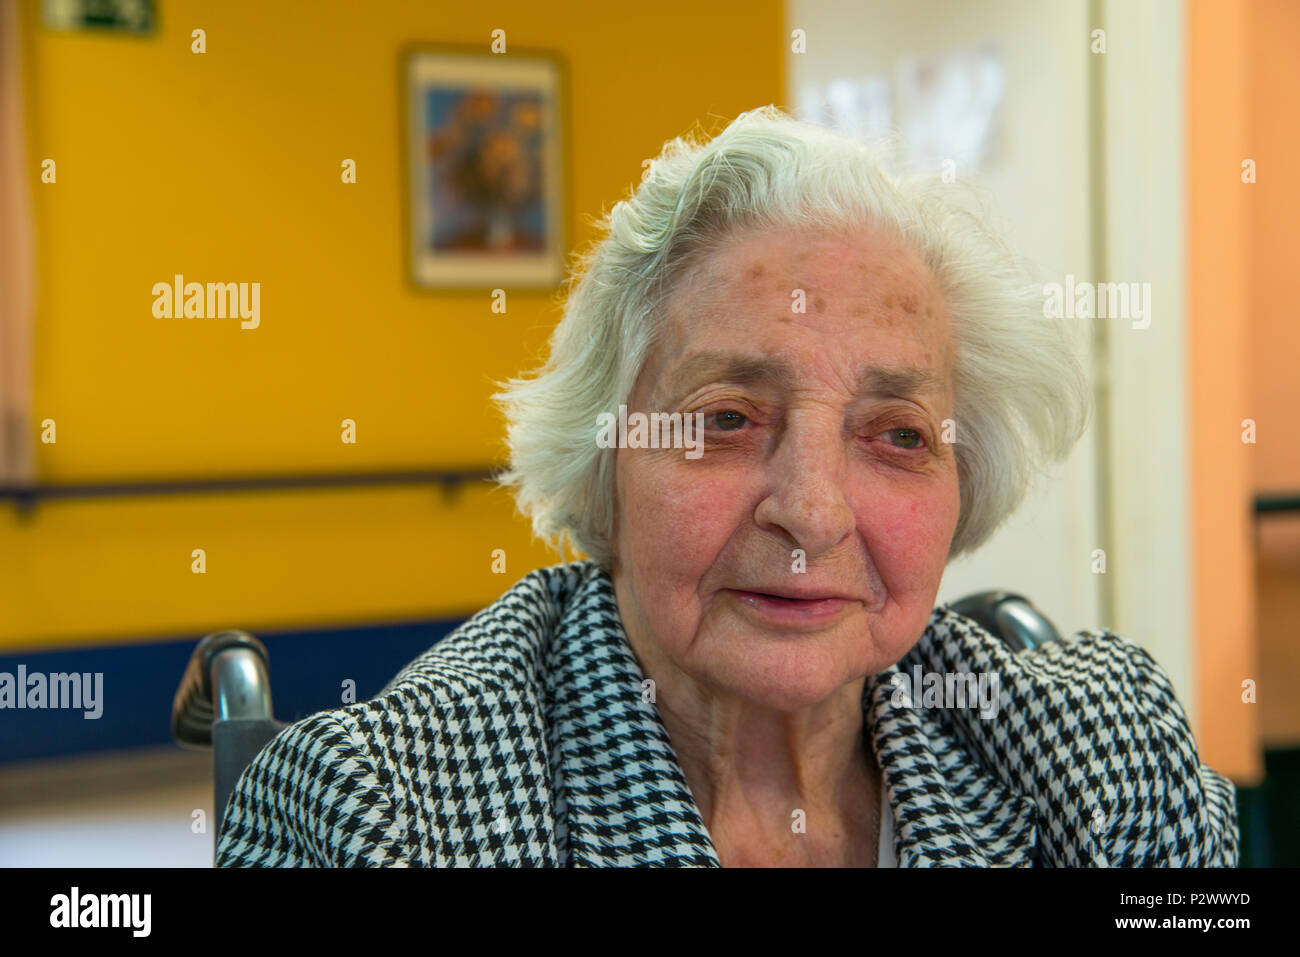 Portrait of old lady smiling. Stock Photo